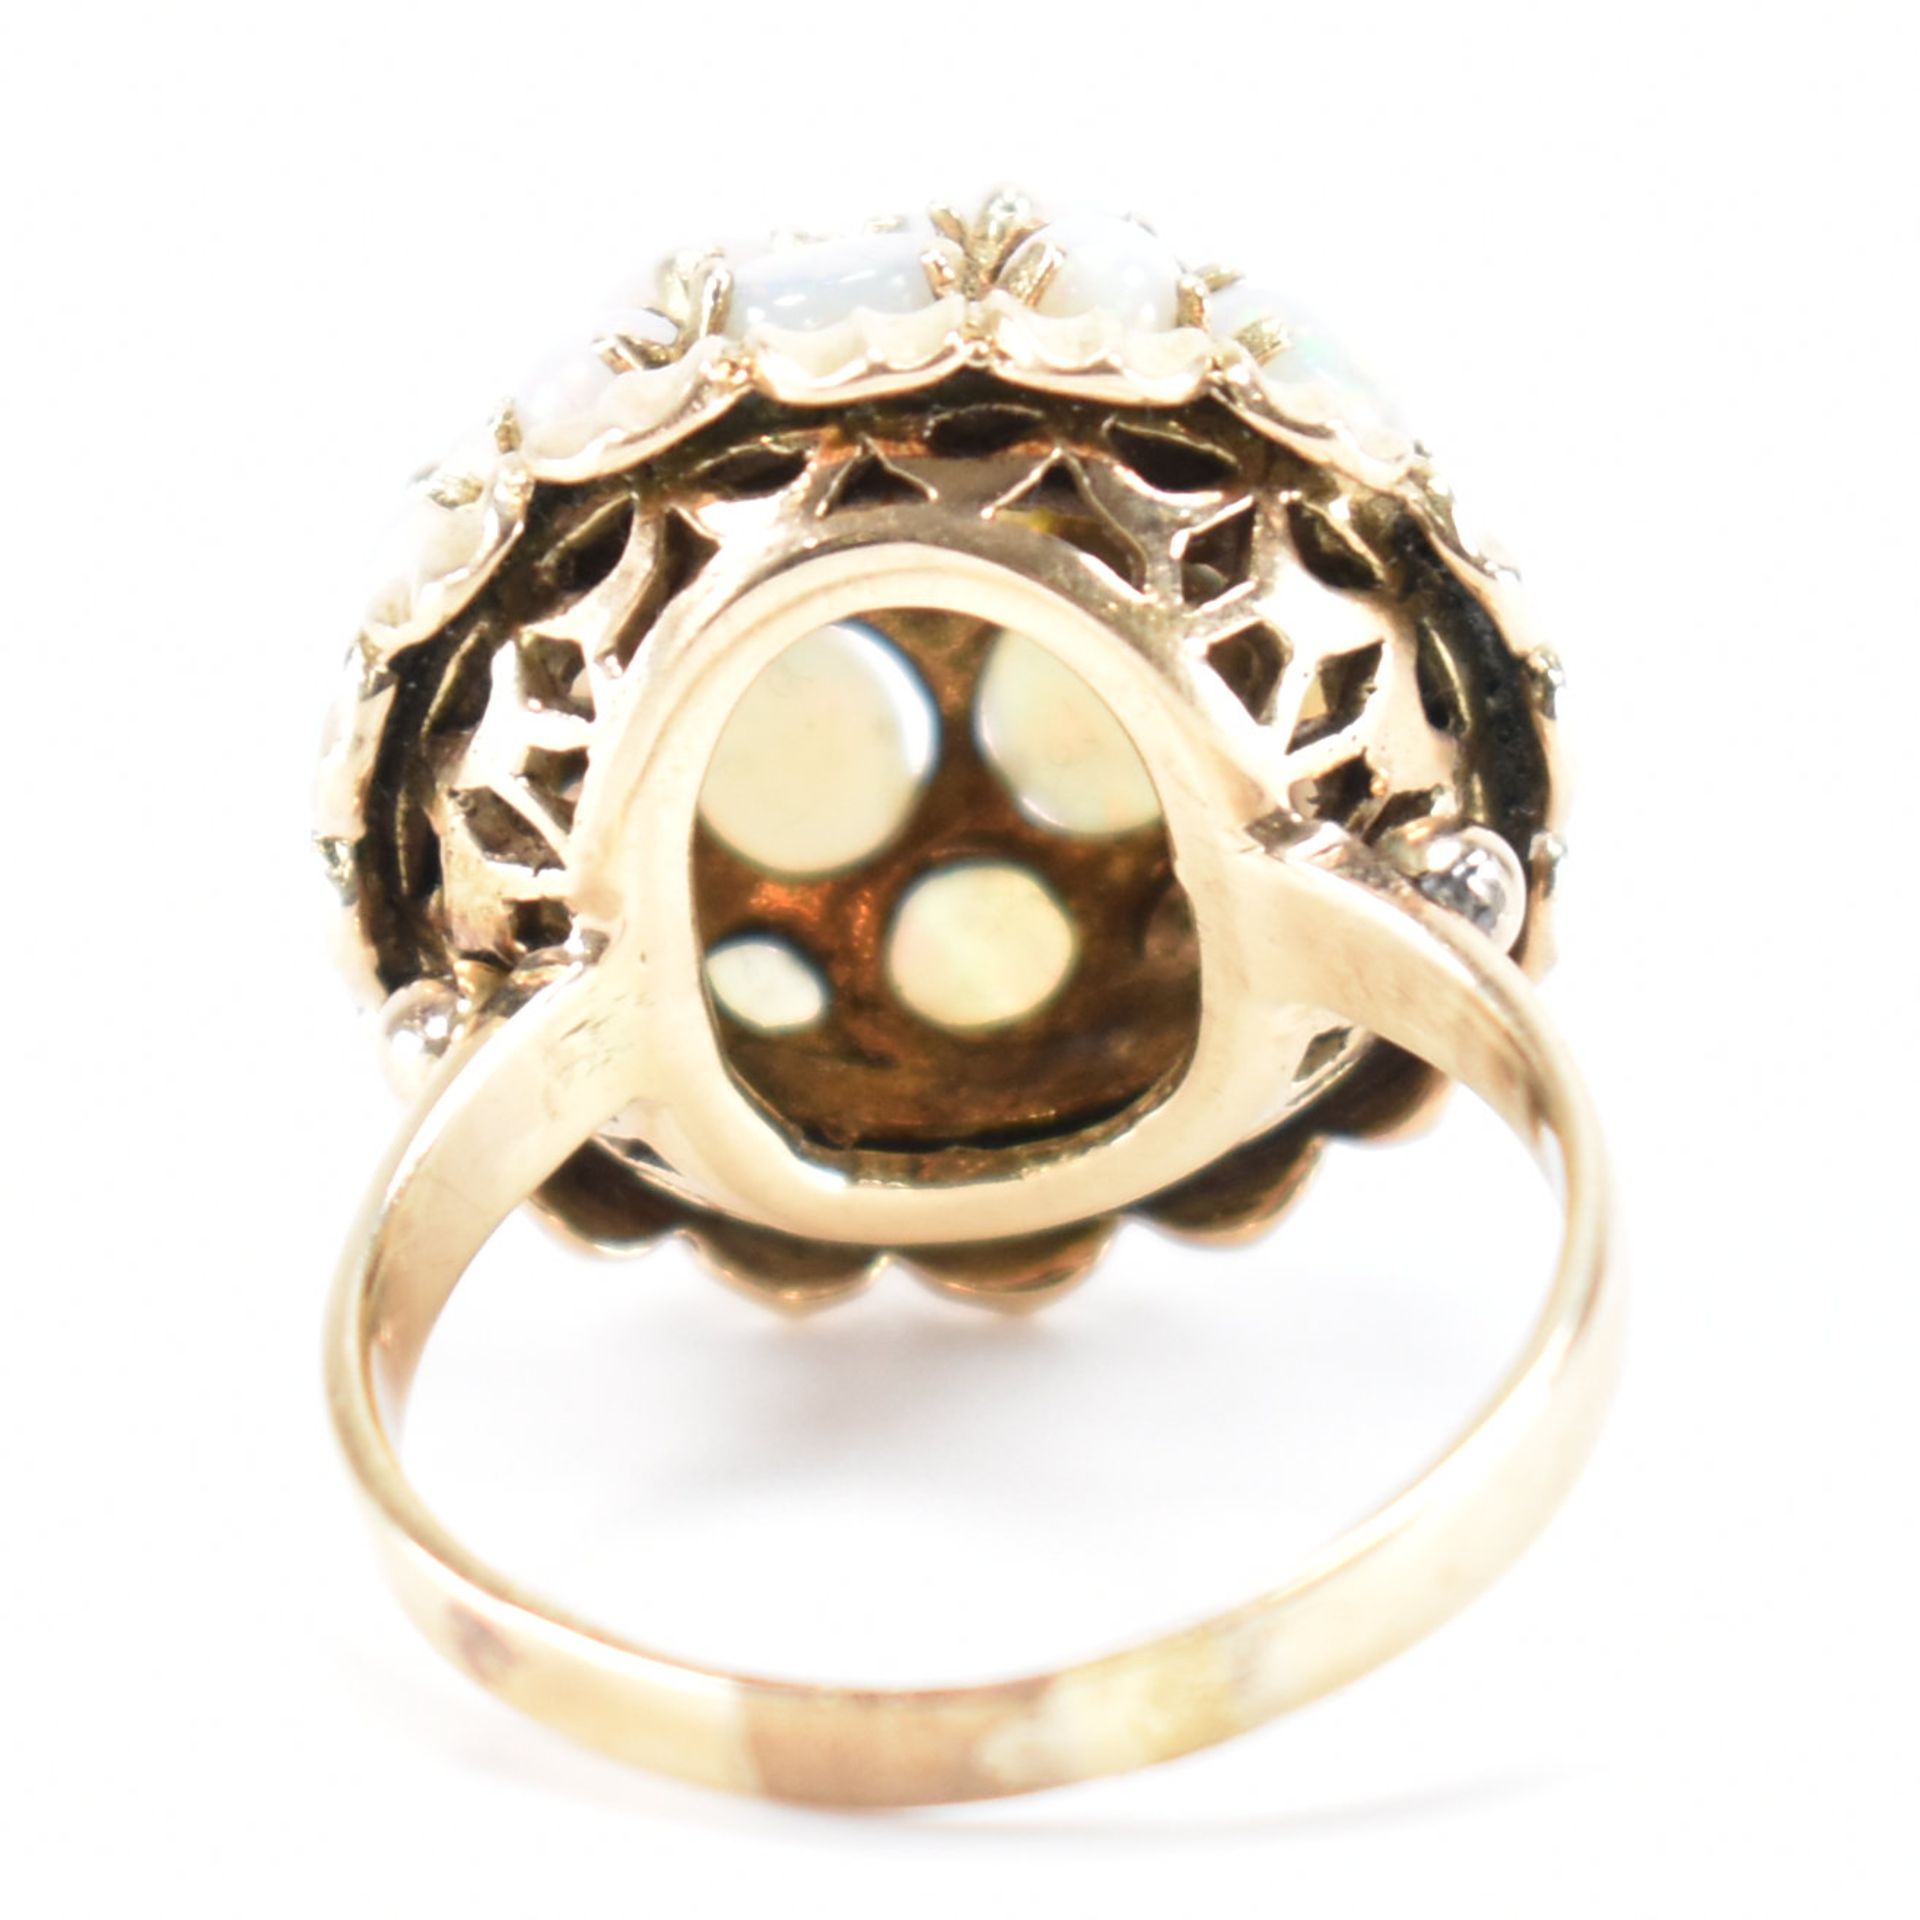 VINTAGE GOLD & OPAL BOMBE RING - Image 3 of 11